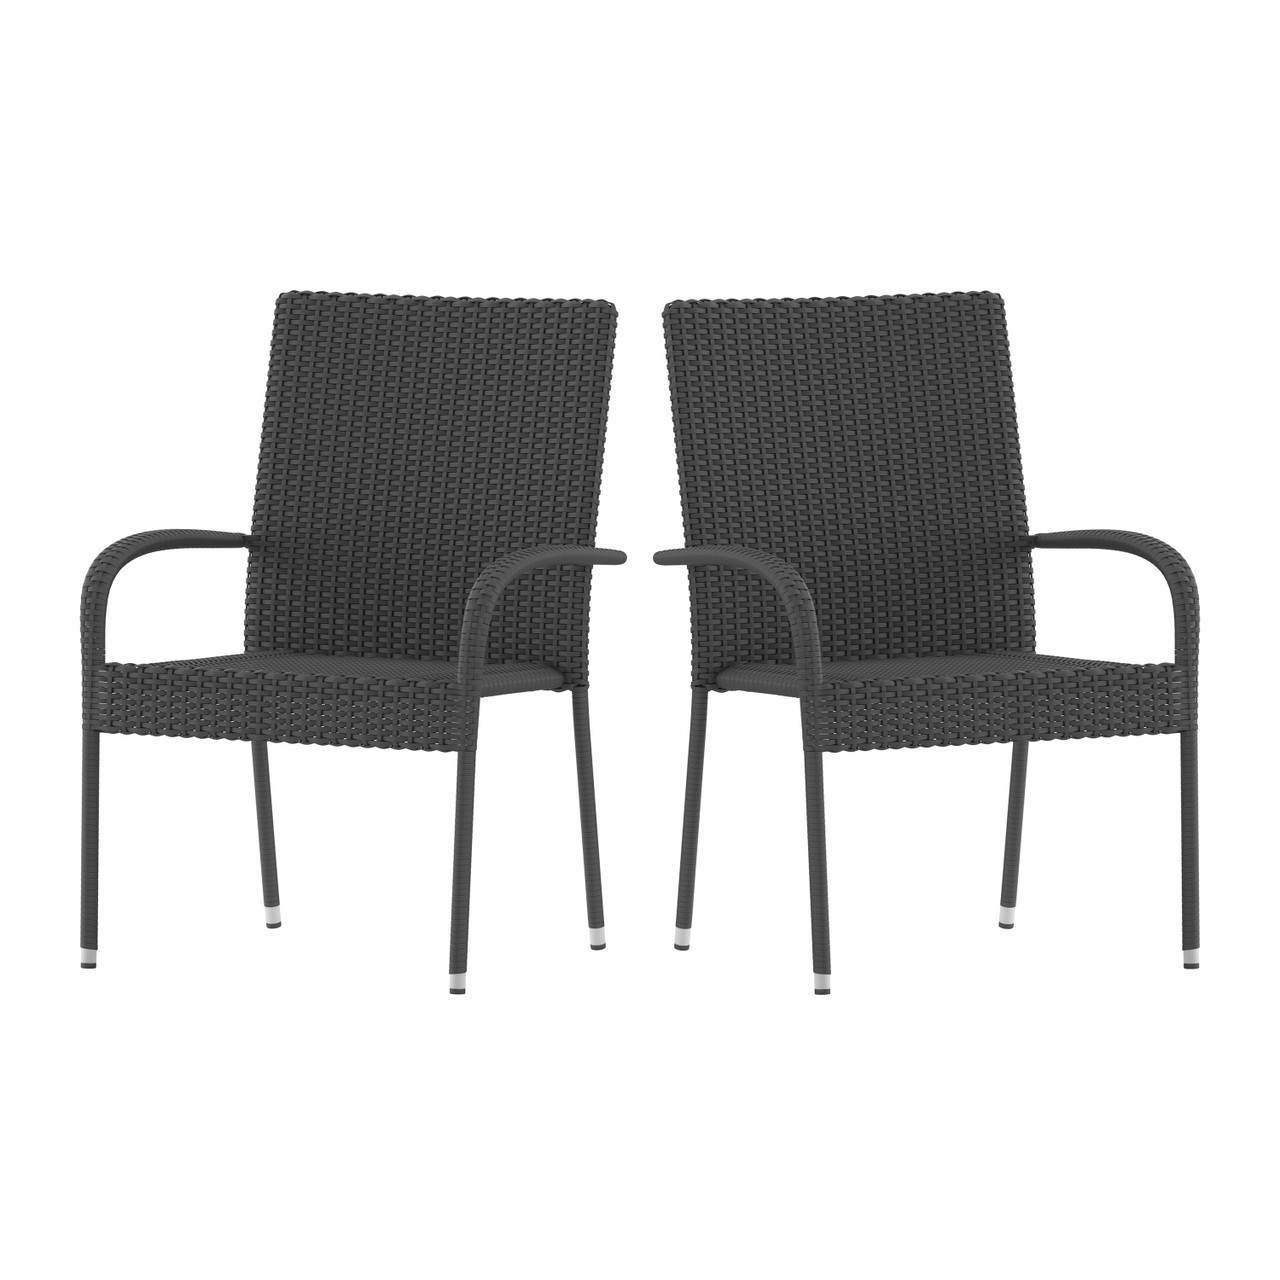 Flash Furniture Maxim Set of 2 Stackable Indoor/Outdoor Wicker Dining Chairs w/ Arms Fade & Weather-Resistant Steel Frames Gray, Model#